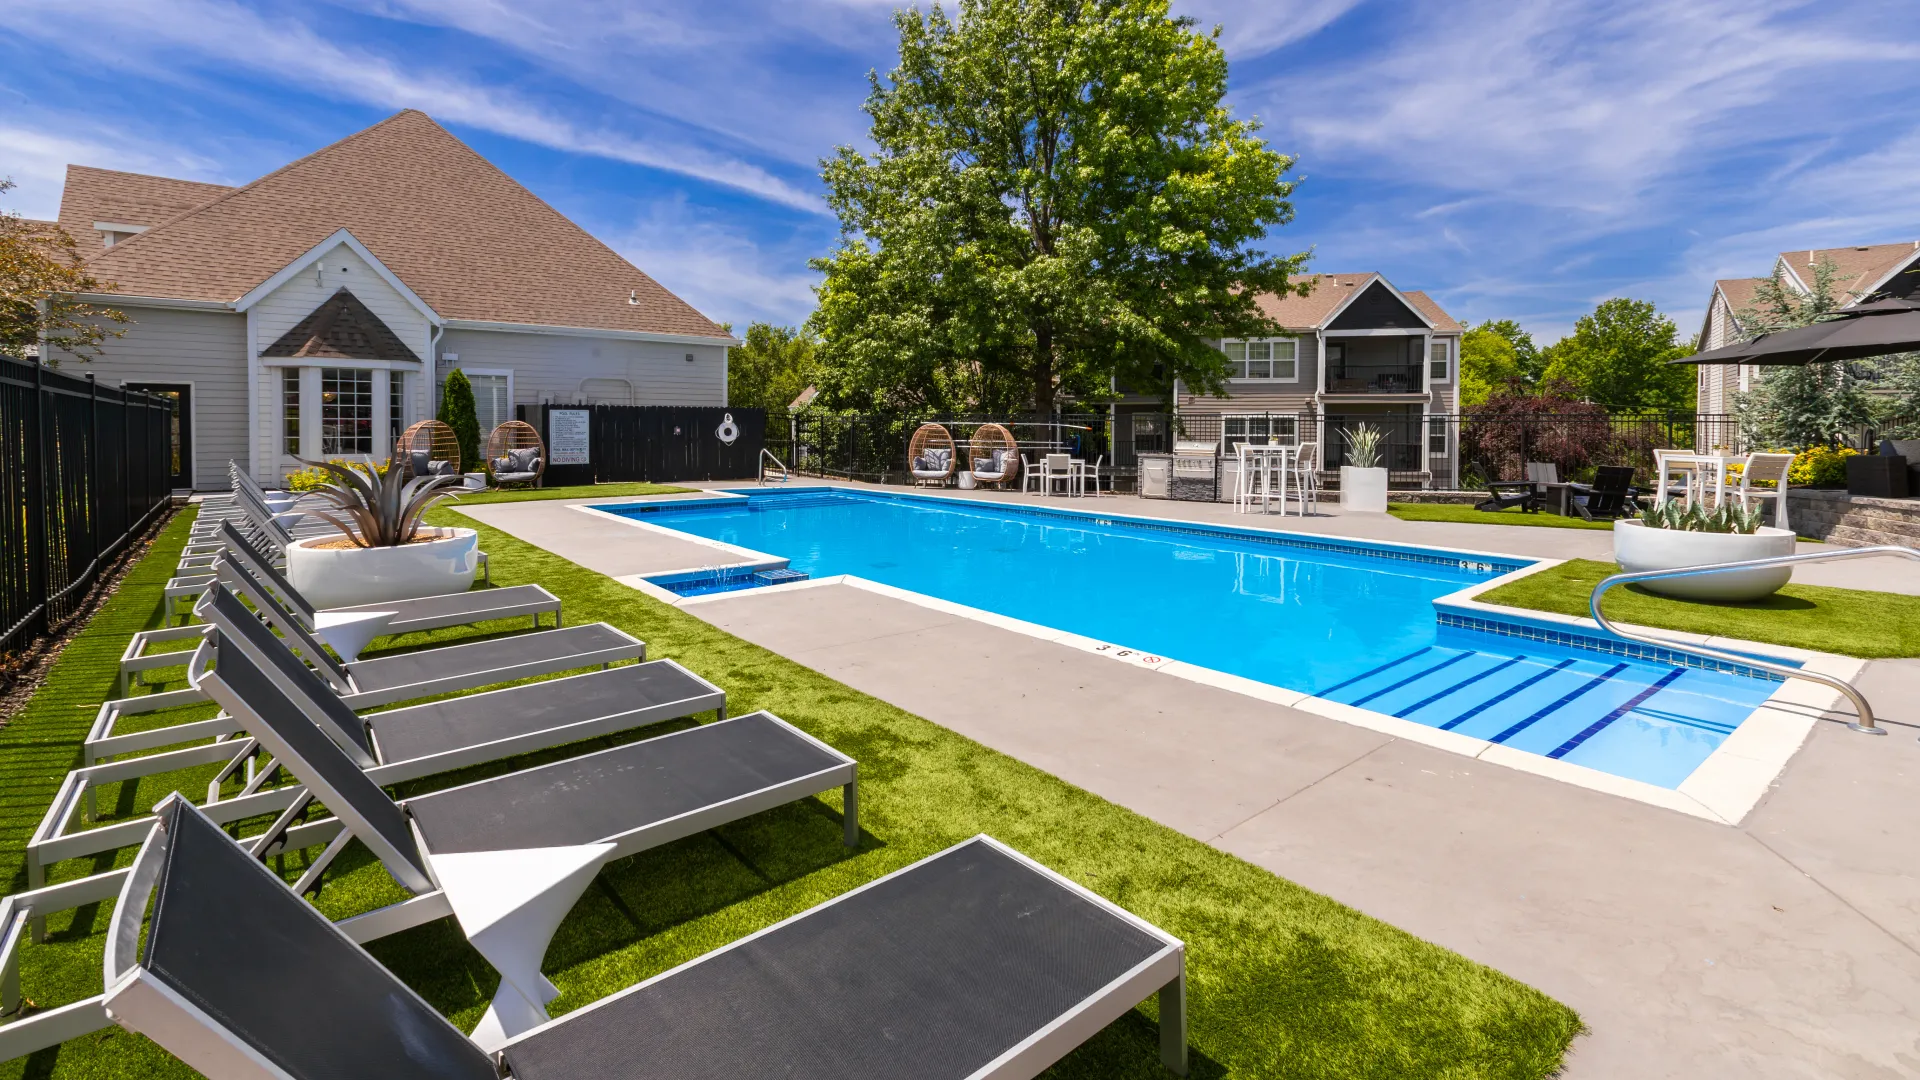 Outdoor swimming pool with lounge chairs, seating areas, and landscaped surroundings.